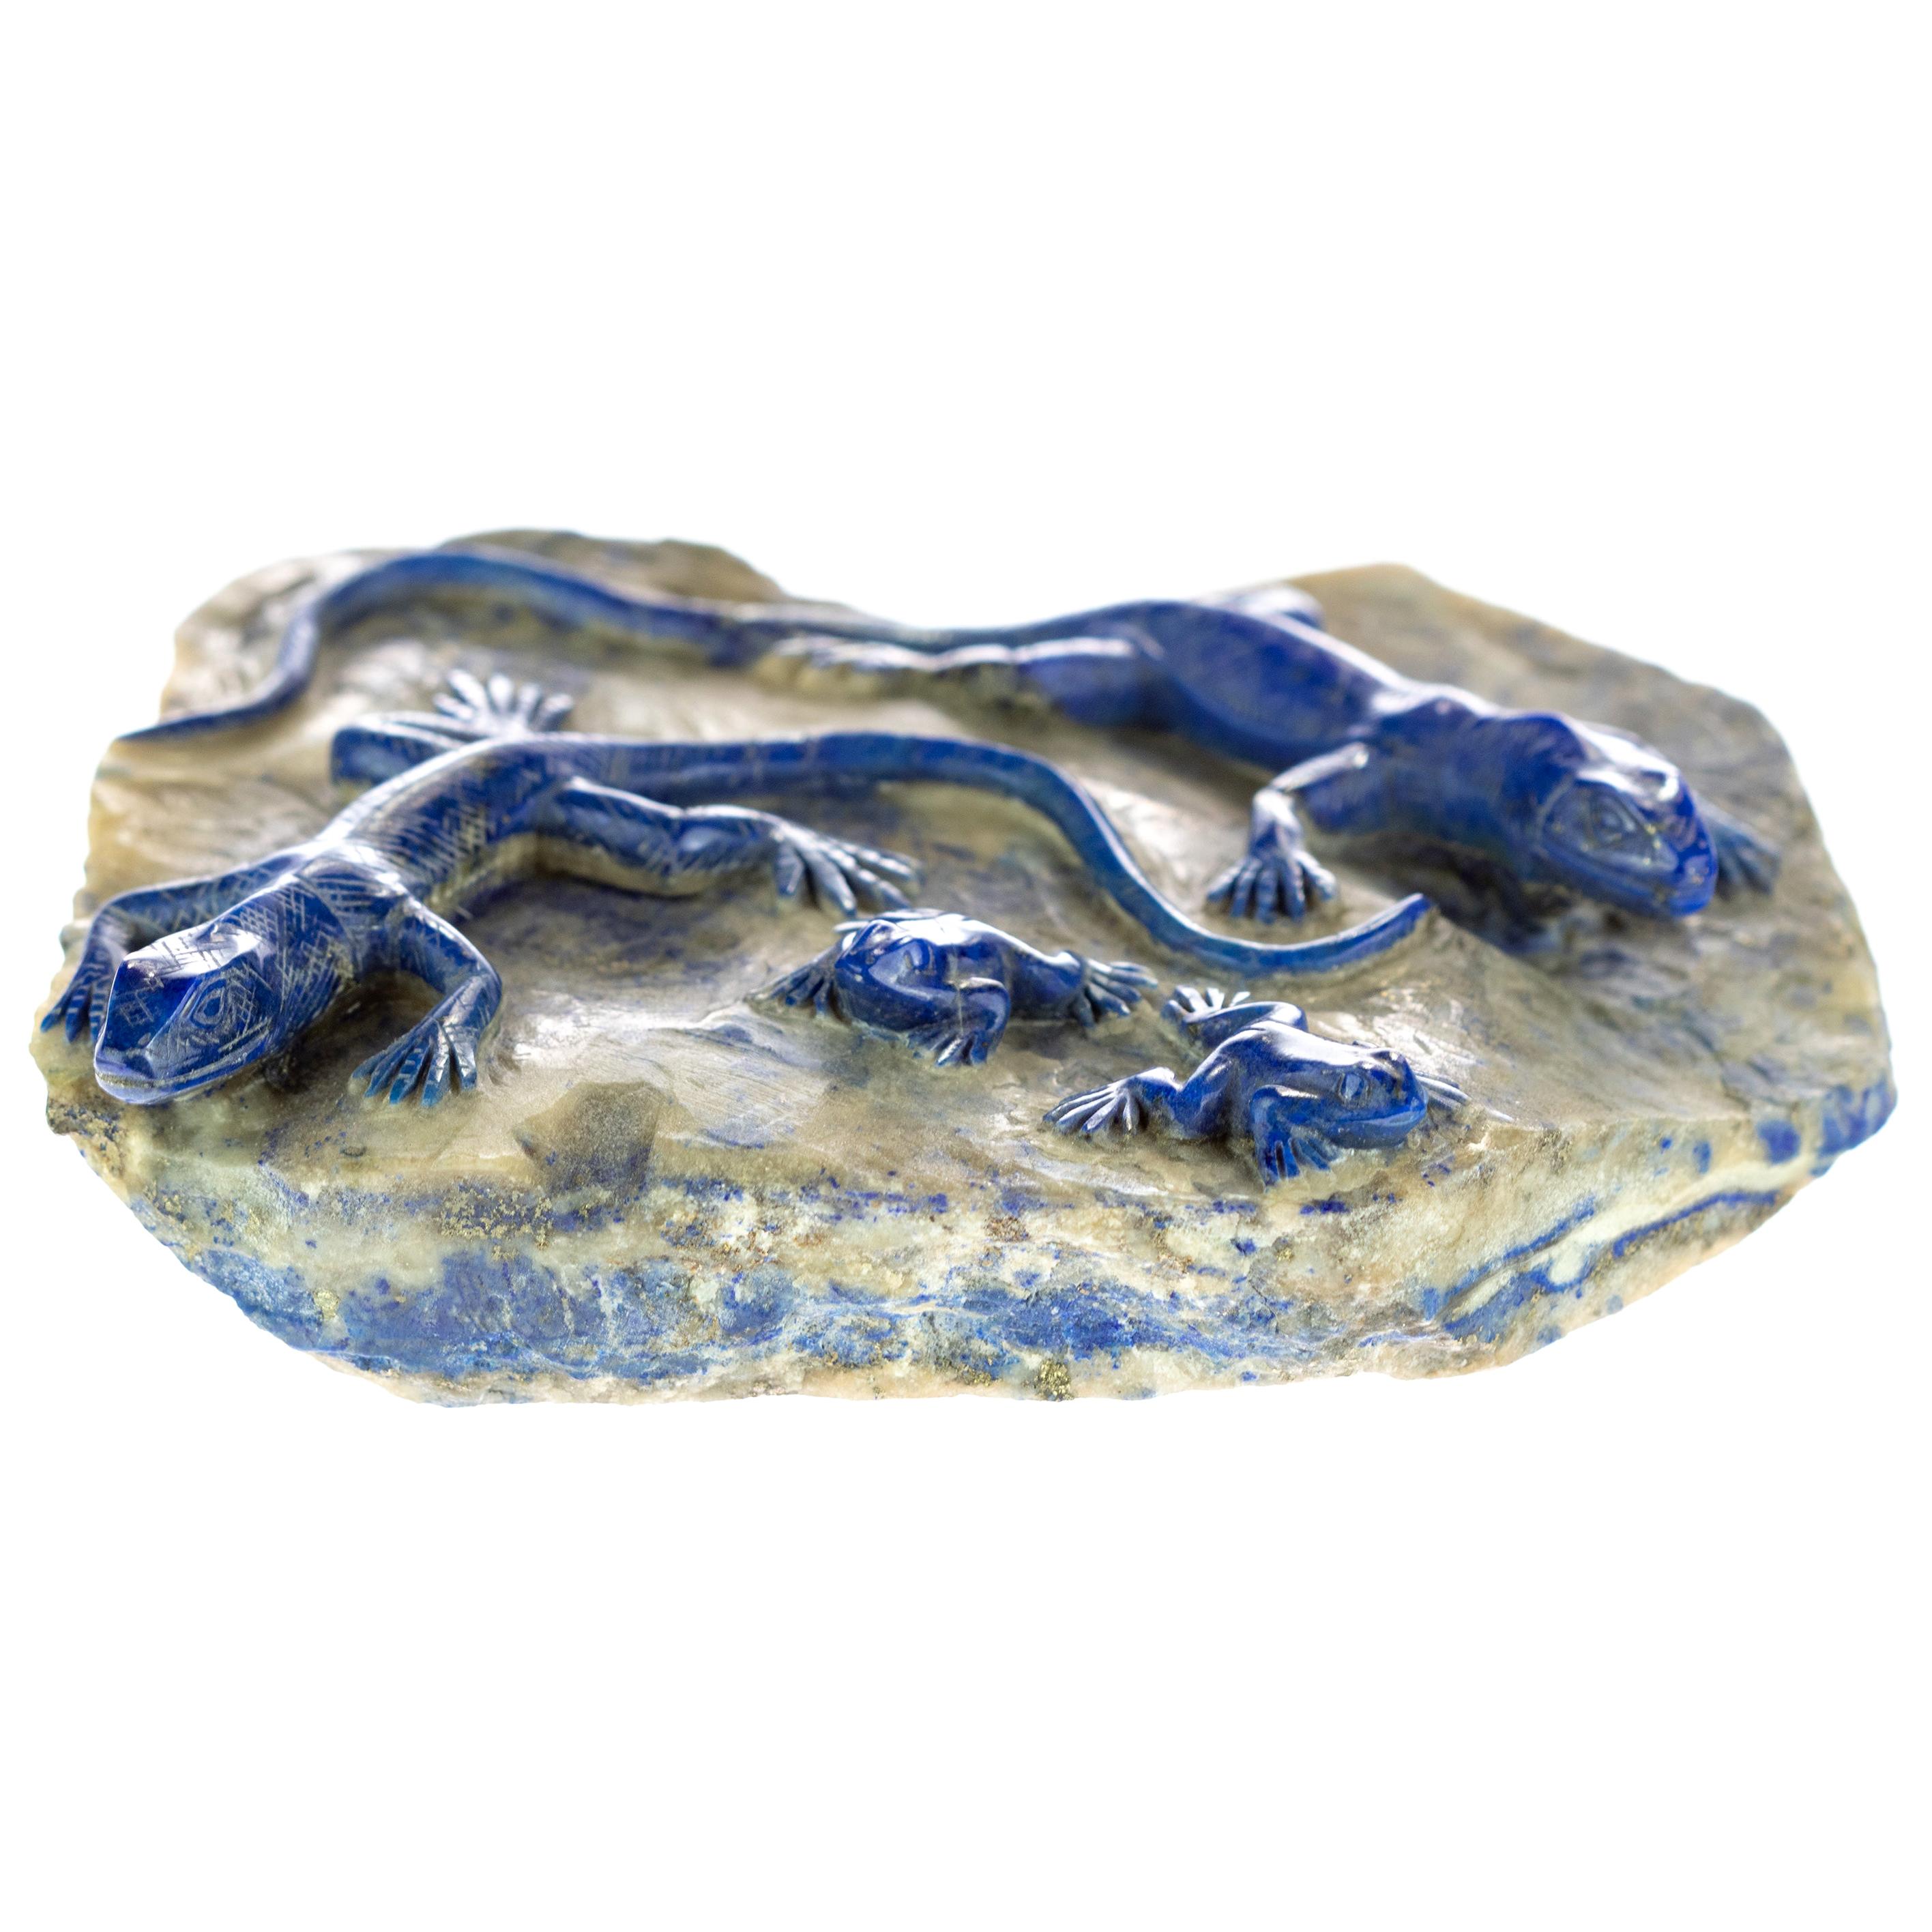 Lapis Lazuli Blue Family of Lizard Carved Animal Artisanal Statue Sculpture For Sale